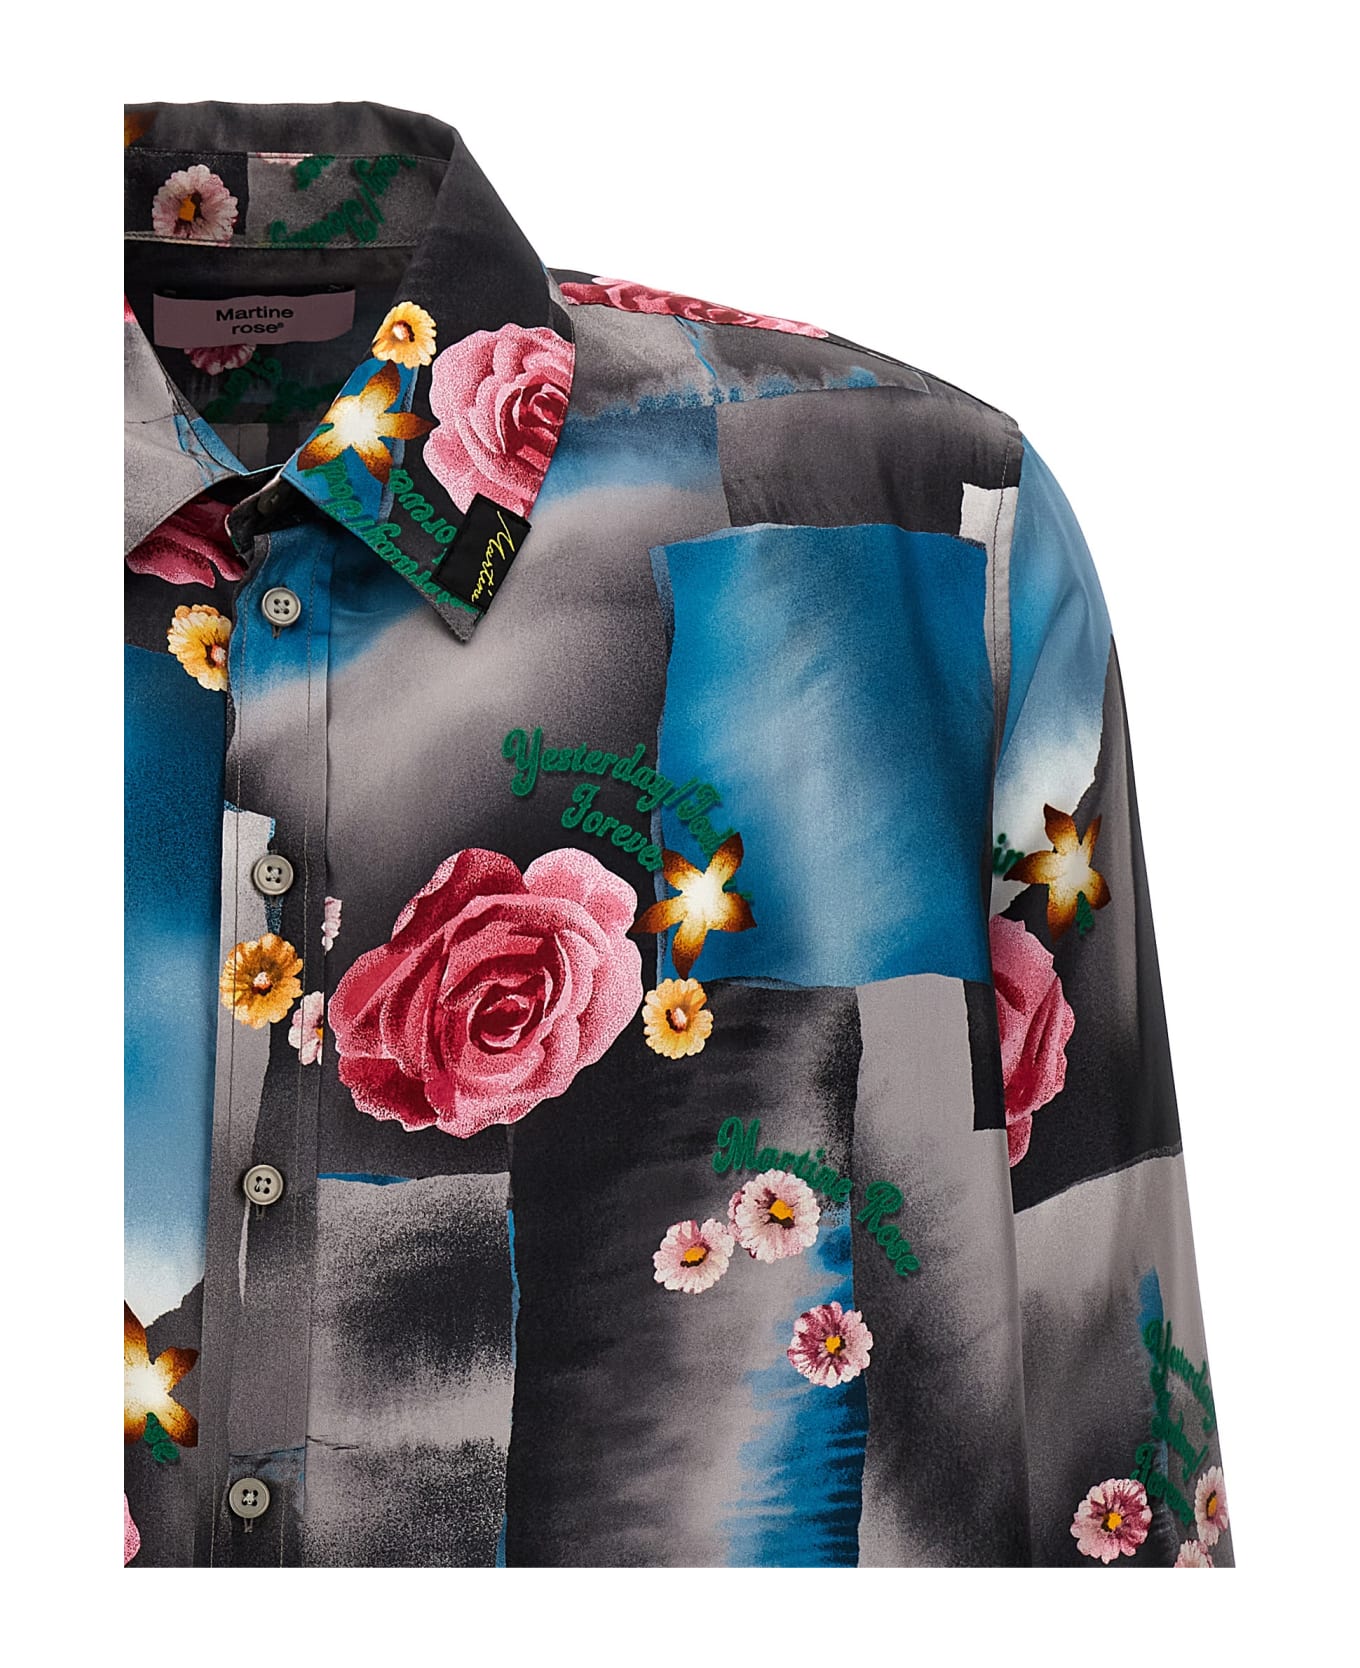 Martine Rose 'today Floral' Shirt - Multicolor シャツ